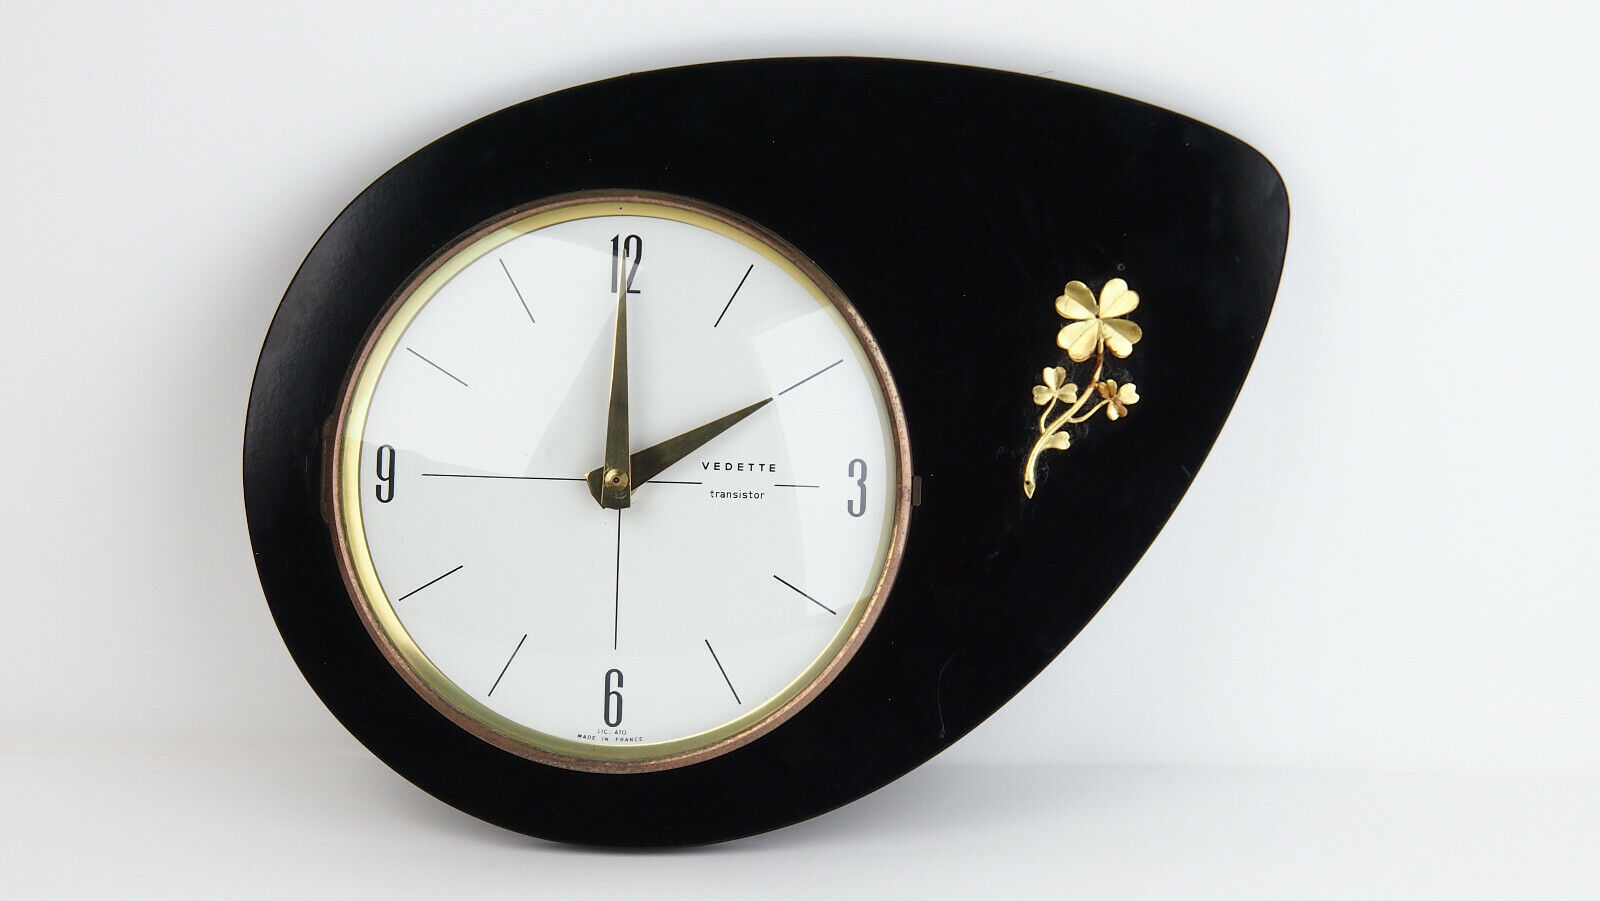 Vintage VEDETTE Transistor wall clock, LIC . ATO MADE IN FRANCE. (Working)